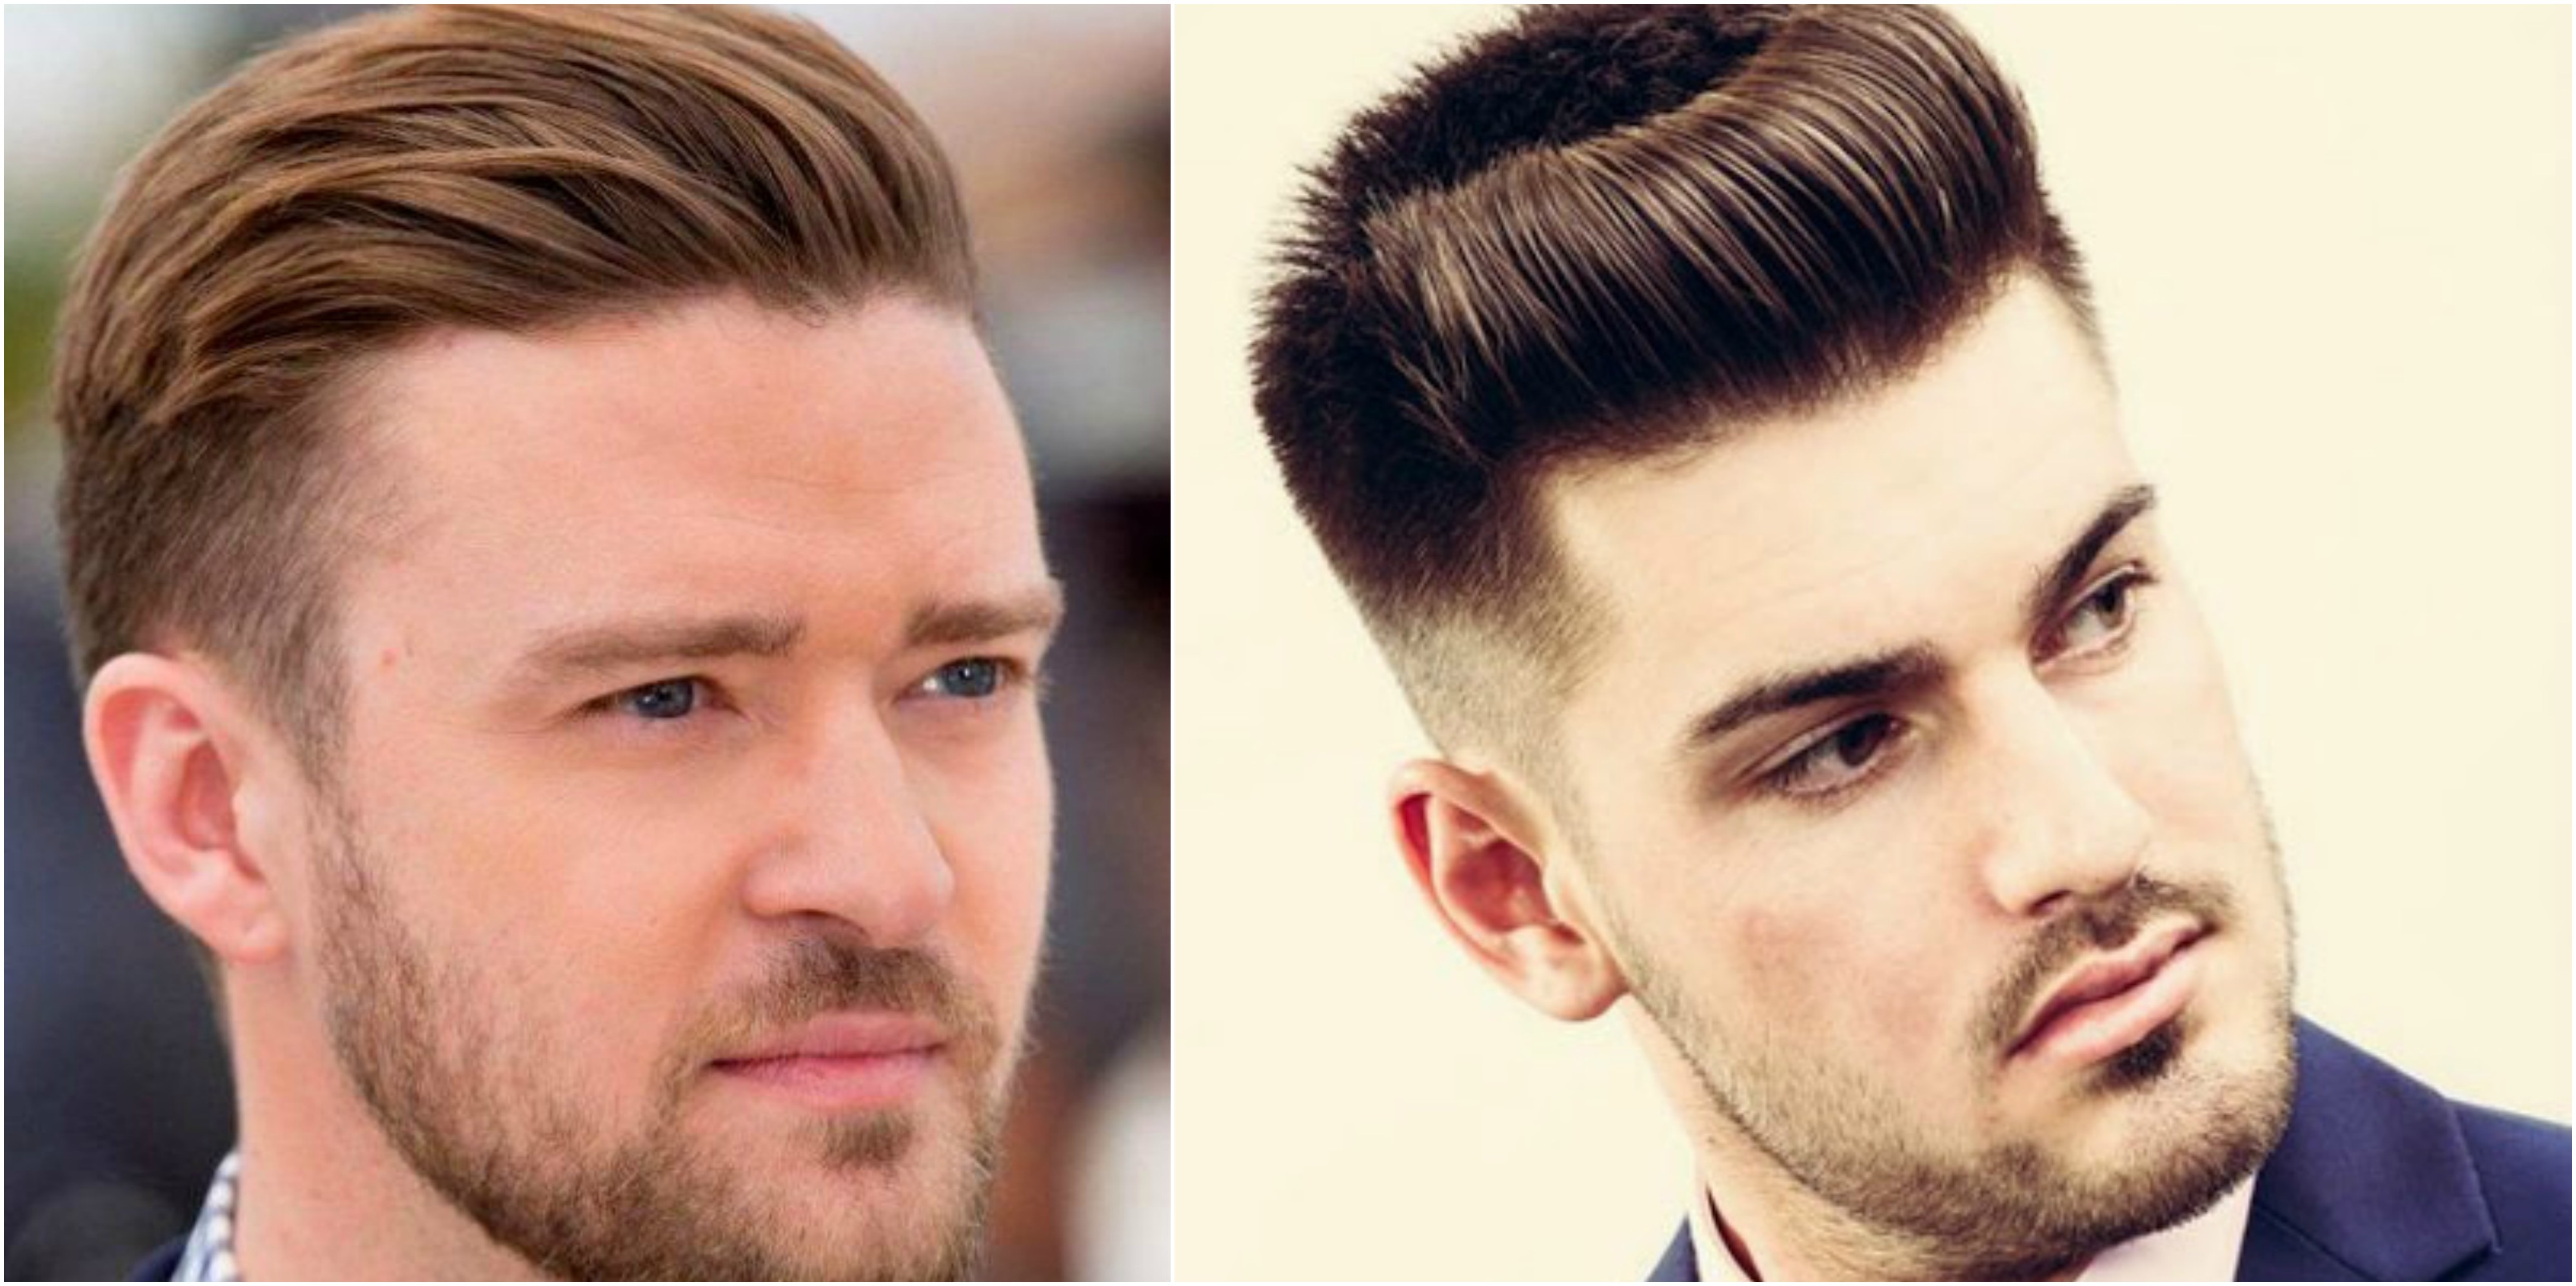 Bald or Buzz Hairstyle for Thin Hair